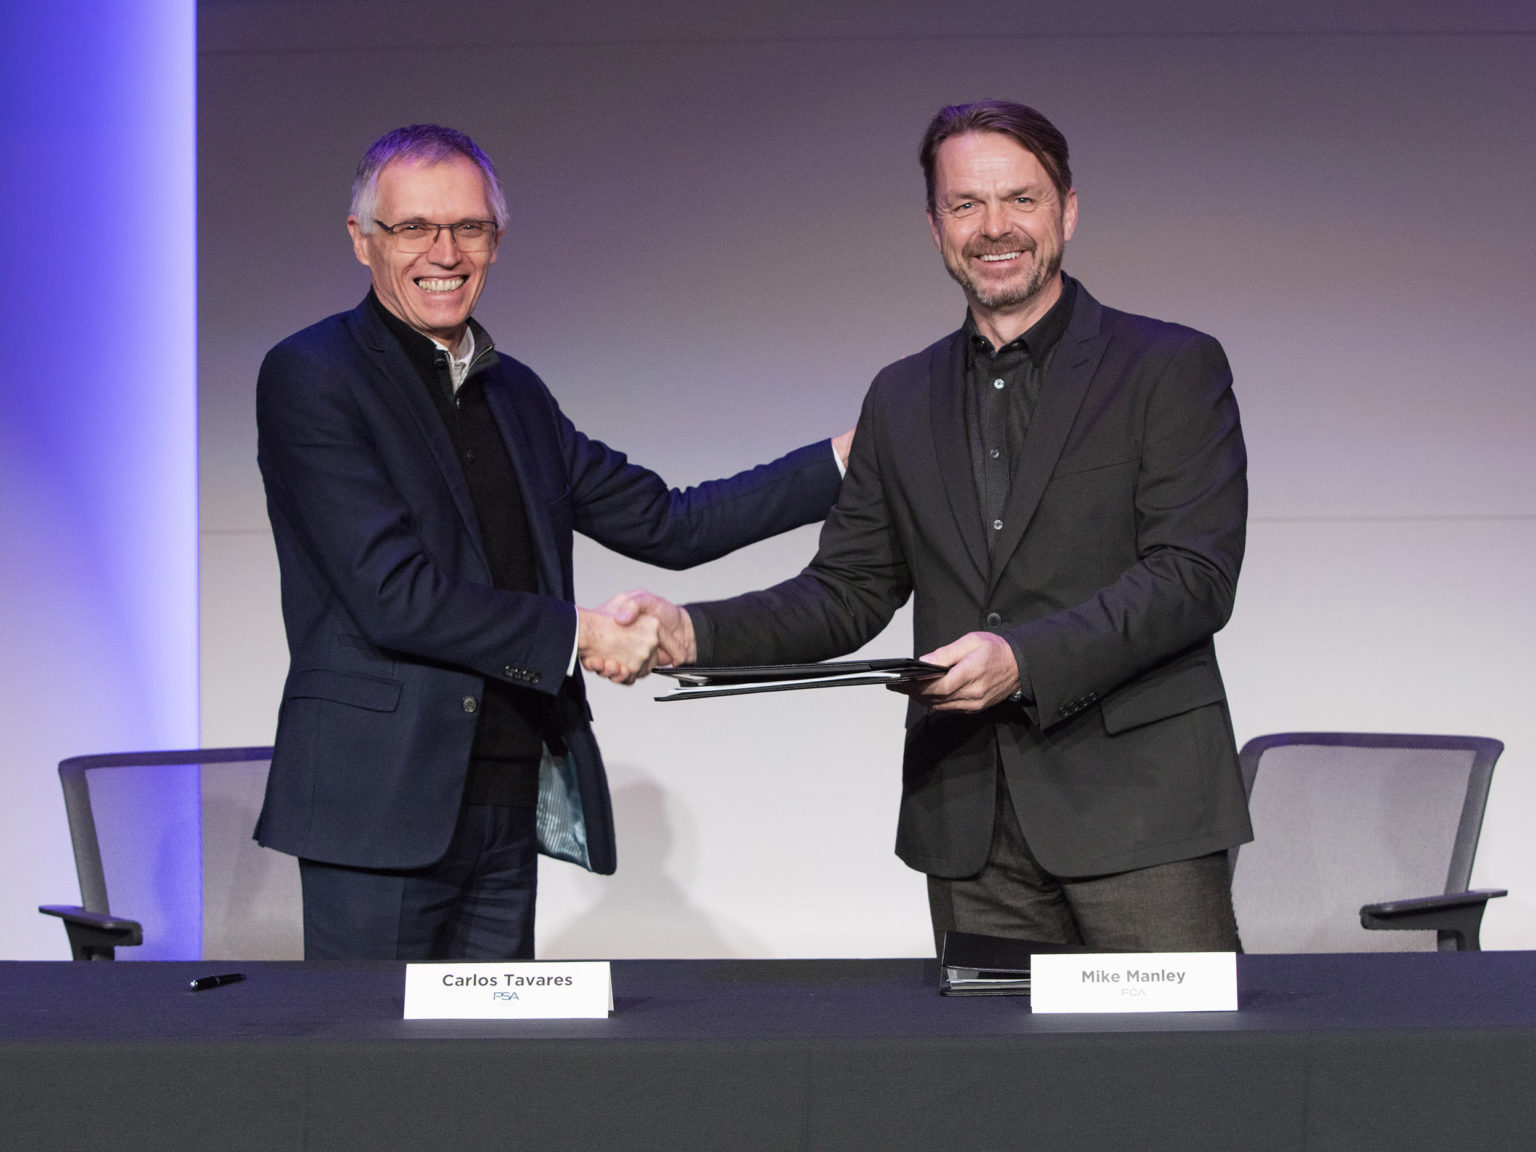 Chairman of the Managing Board of Groupe PSA Carlos Tavares (left) and FCA CEO Mike Manley (right) share a congratulatory handshake after signing the historic combination agreement